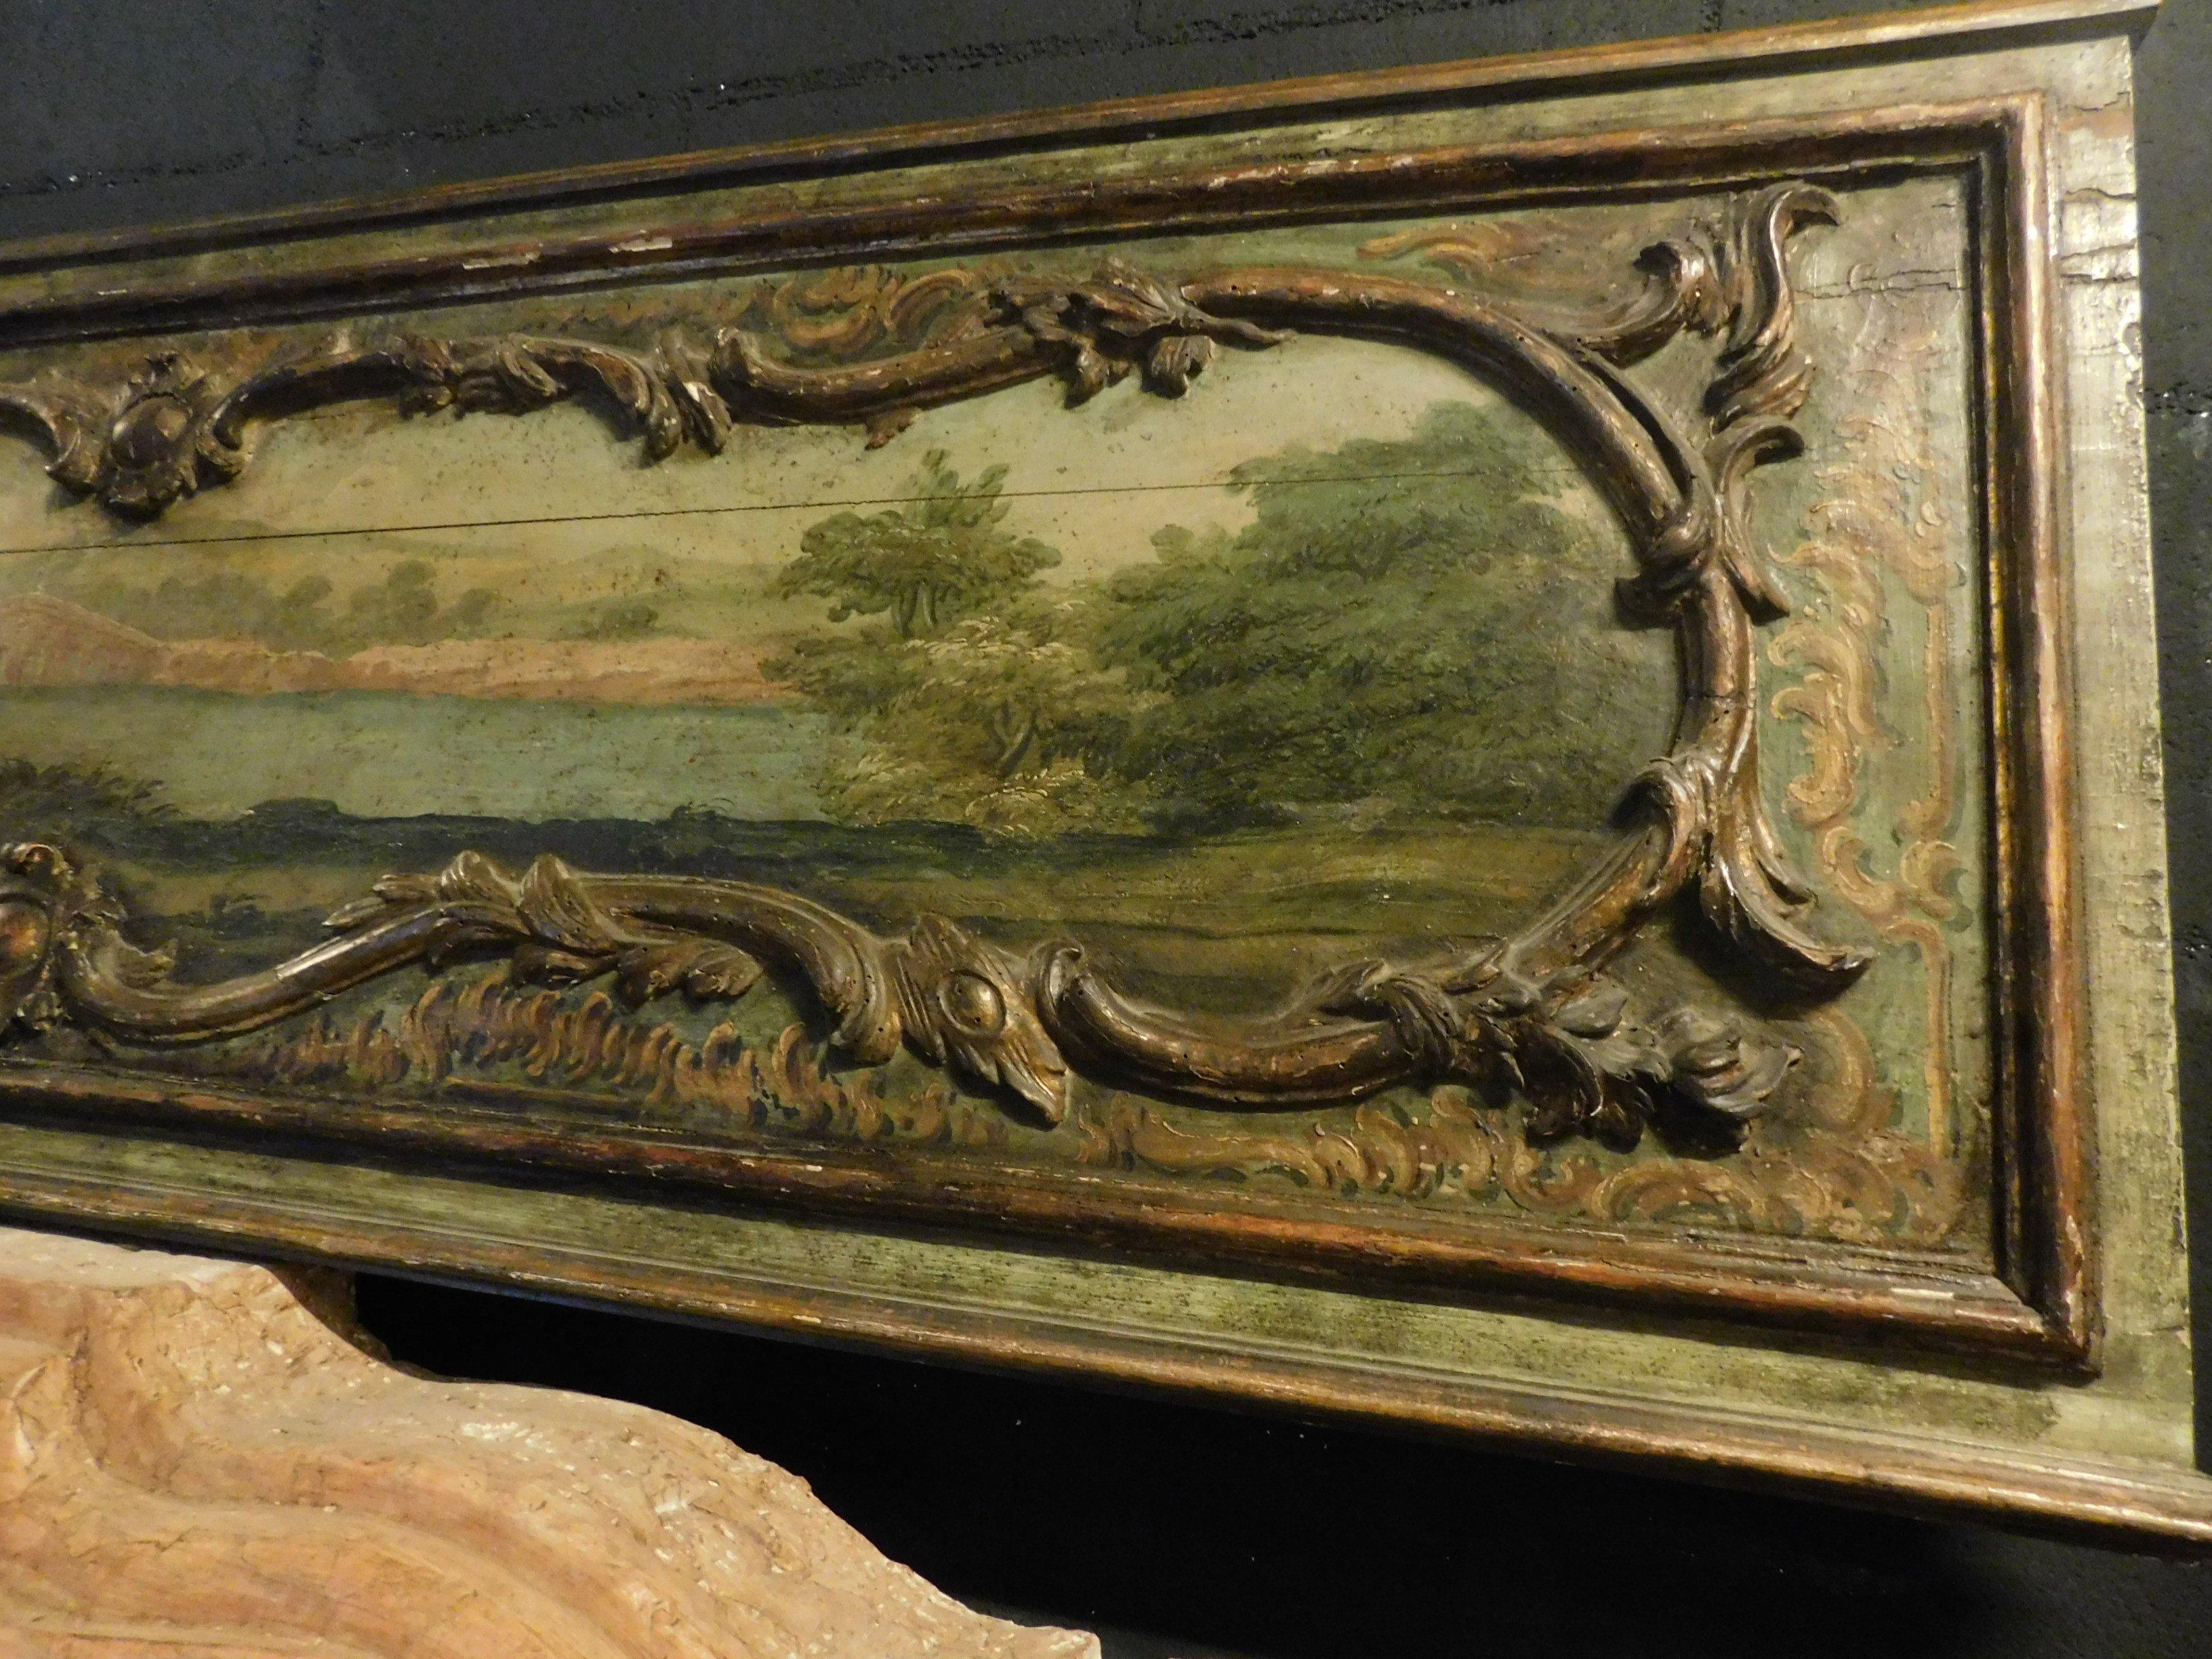 Italian Antique Panel Hand Painted on Wood, Green with Landscape, Italy, 1700